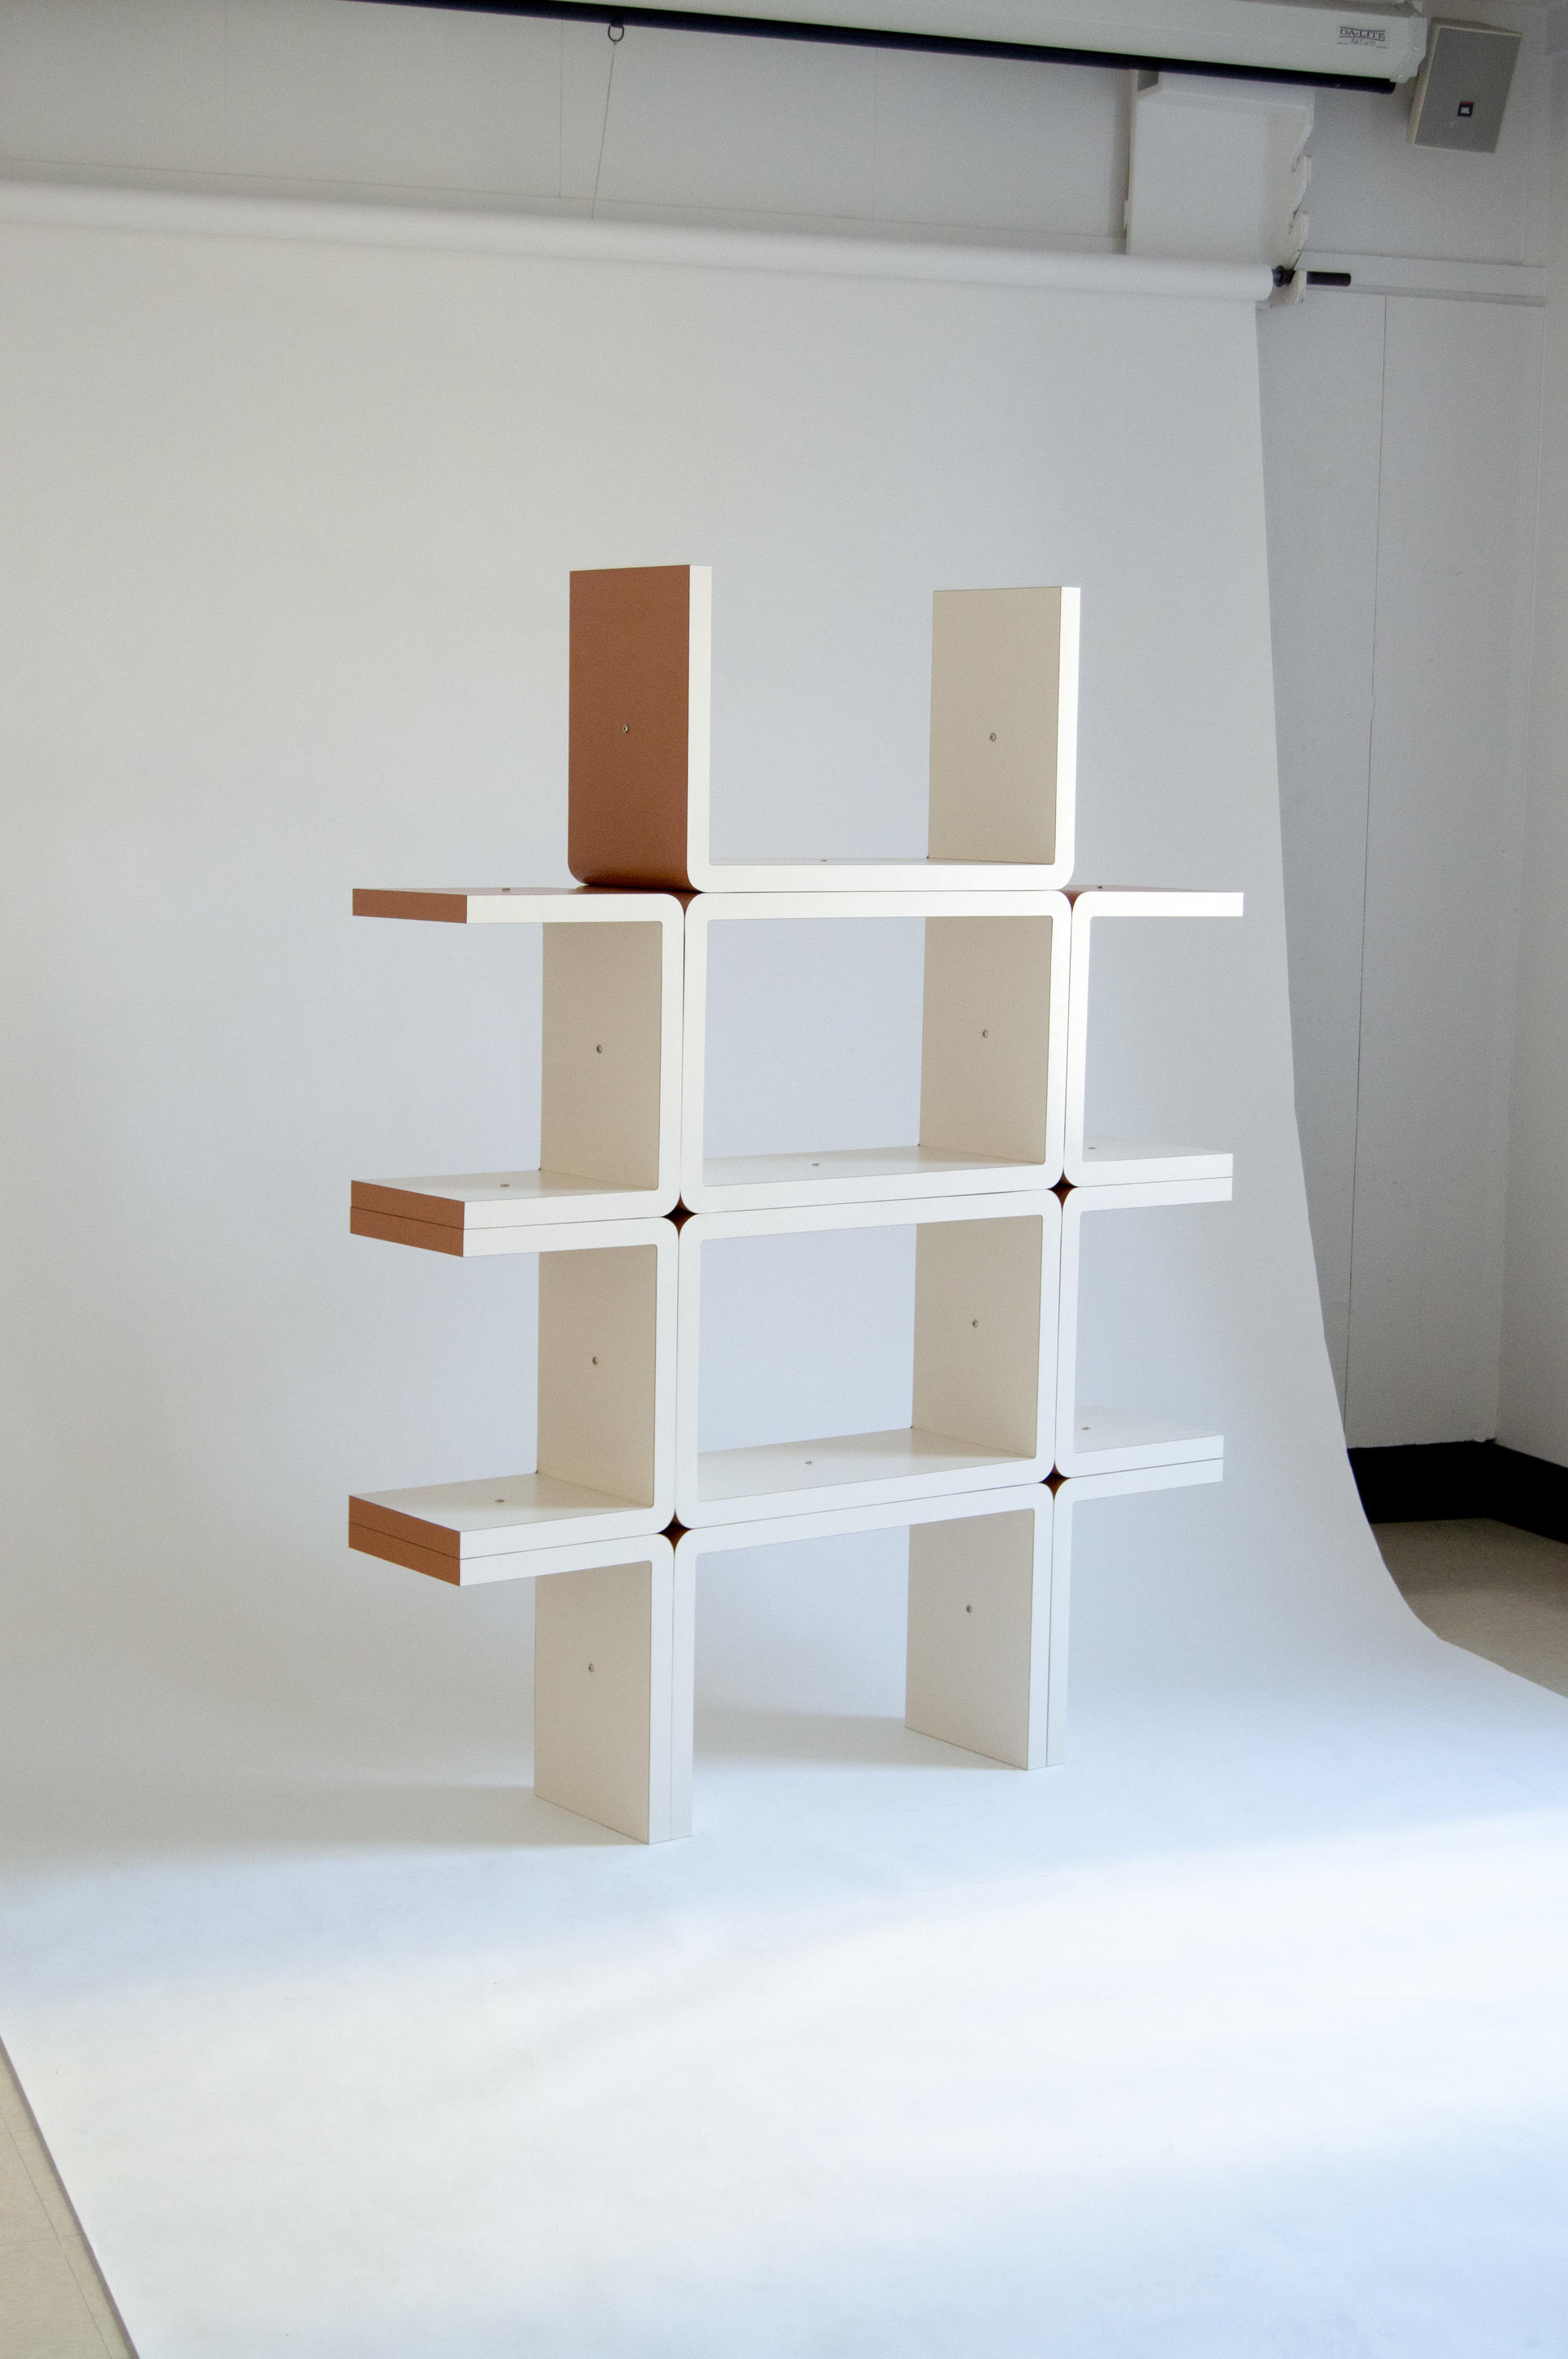 A modular shelving system that re-considers design and architectural references from the 60s/80s in a contemporary context.